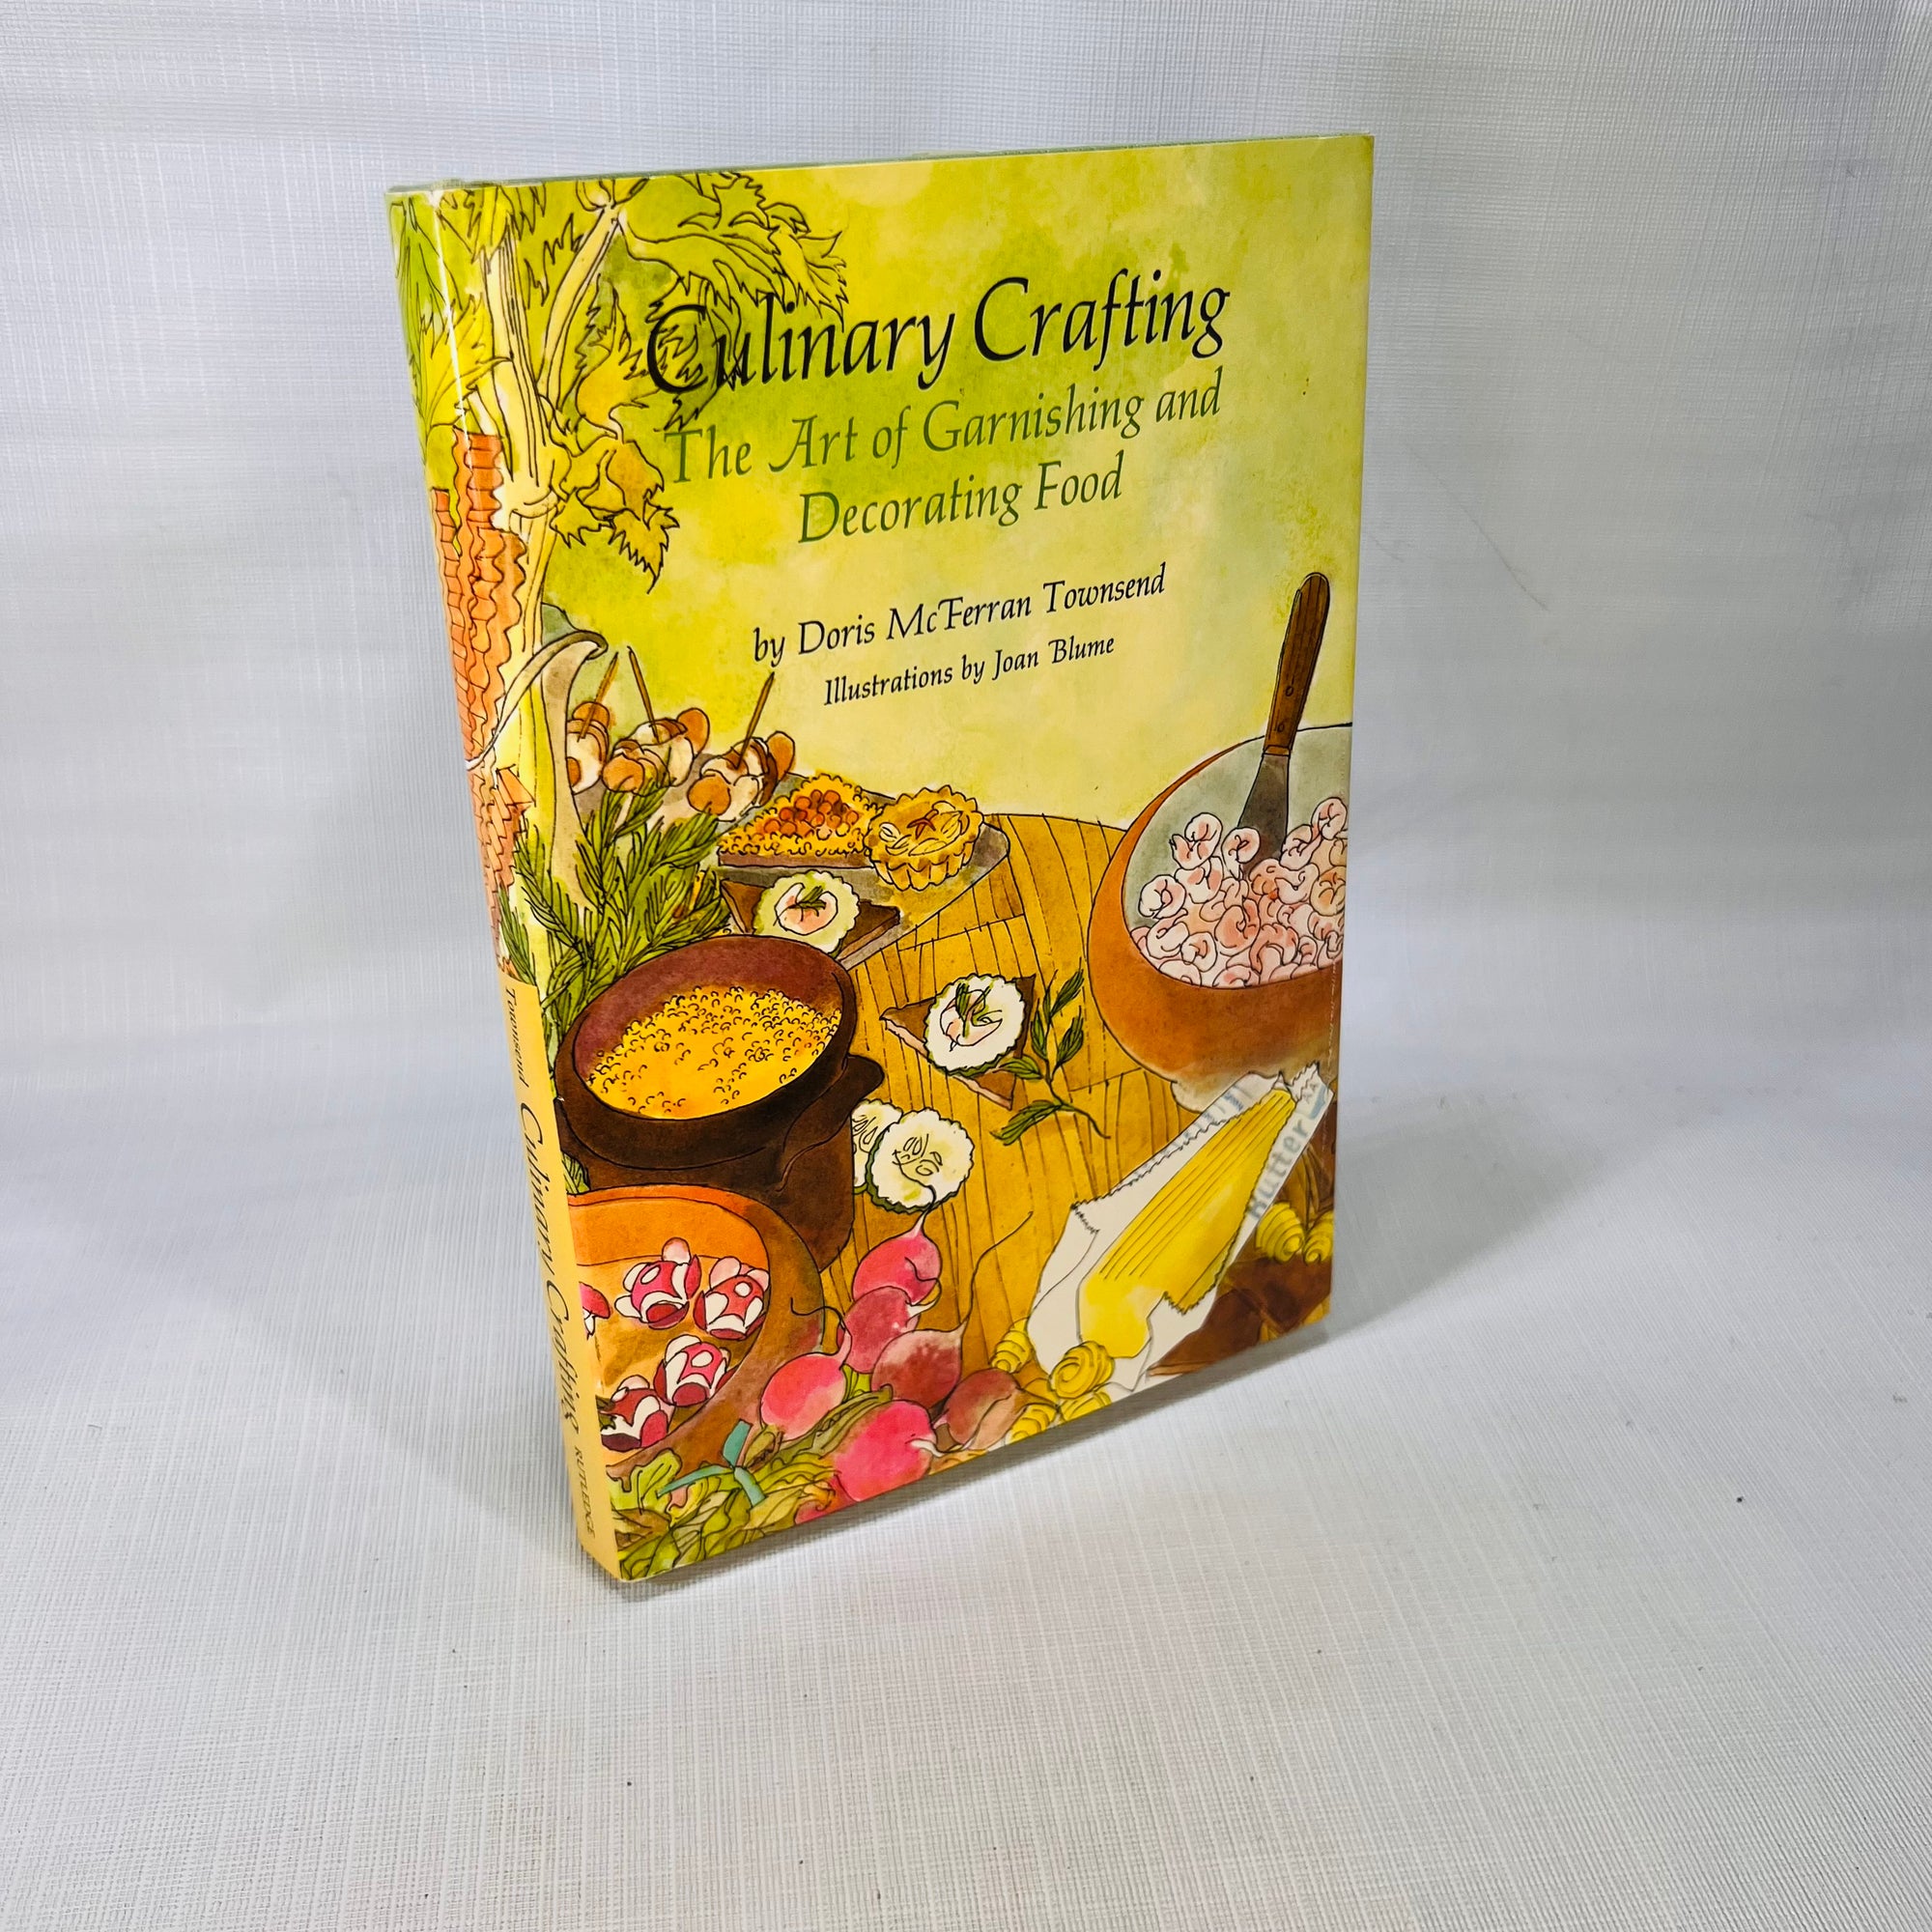 Culinary Crafting The Art of Garnishing and Decorating Food by Doris McFerran Townsend illustrations by Joan Blume 1976 Rutledge Books